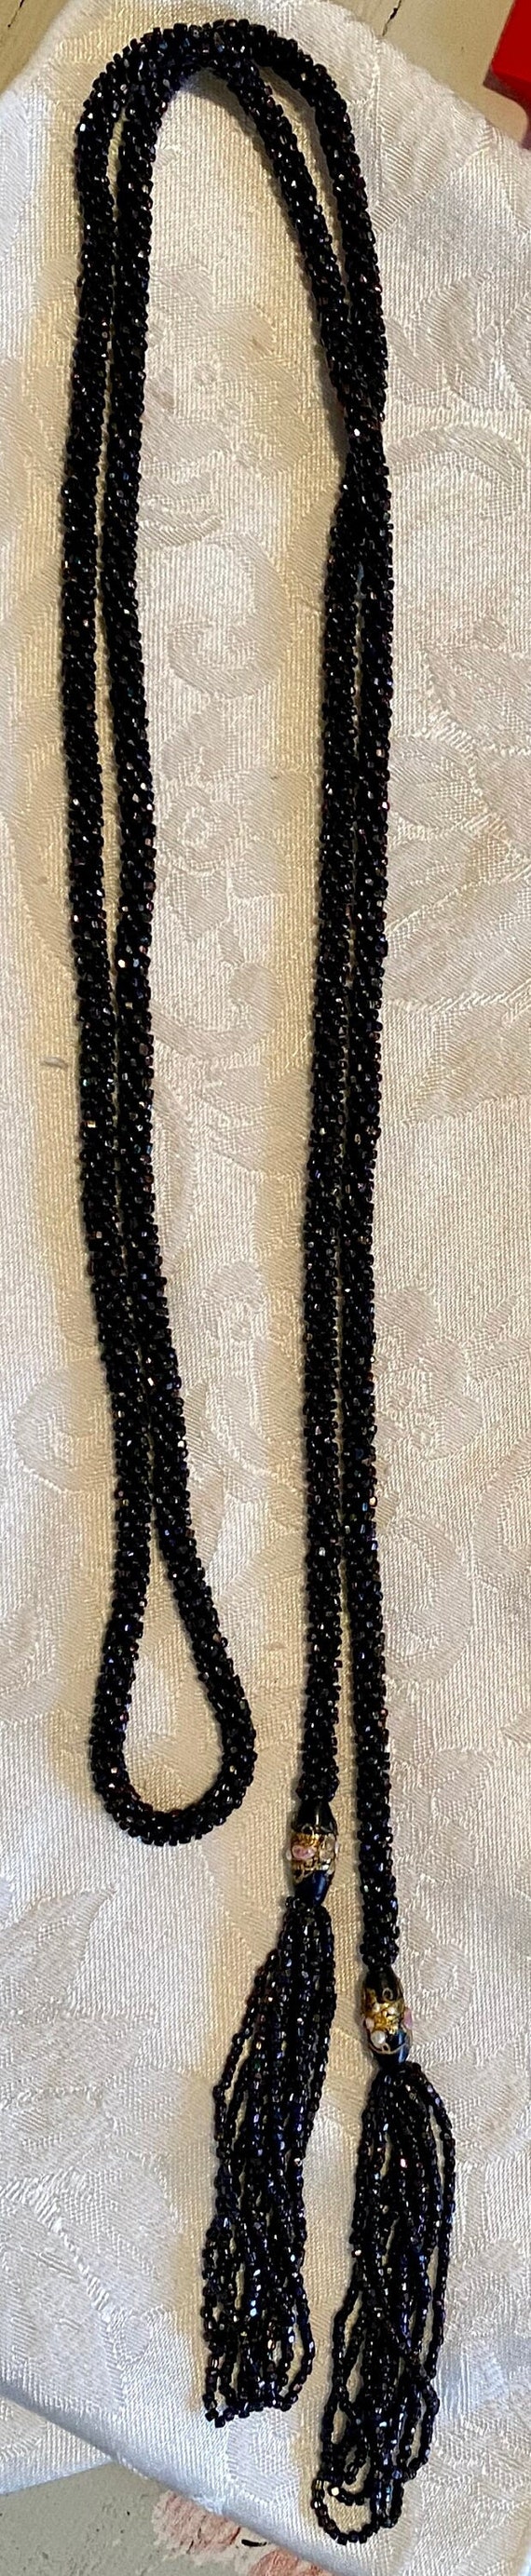 Vintage flapper style beads, black glass seed bead